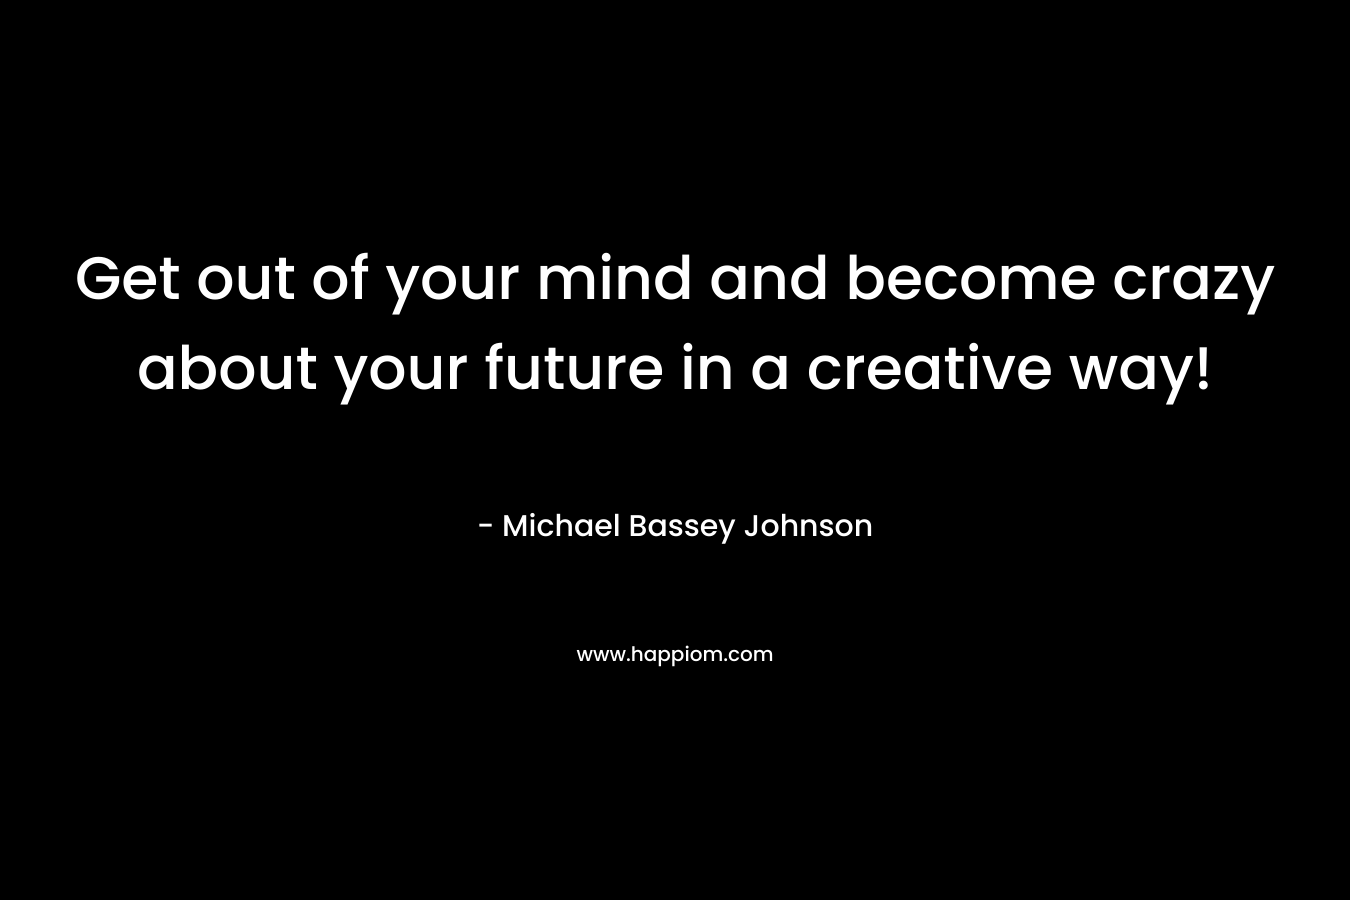 Get out of your mind and become crazy about your future in a creative way!